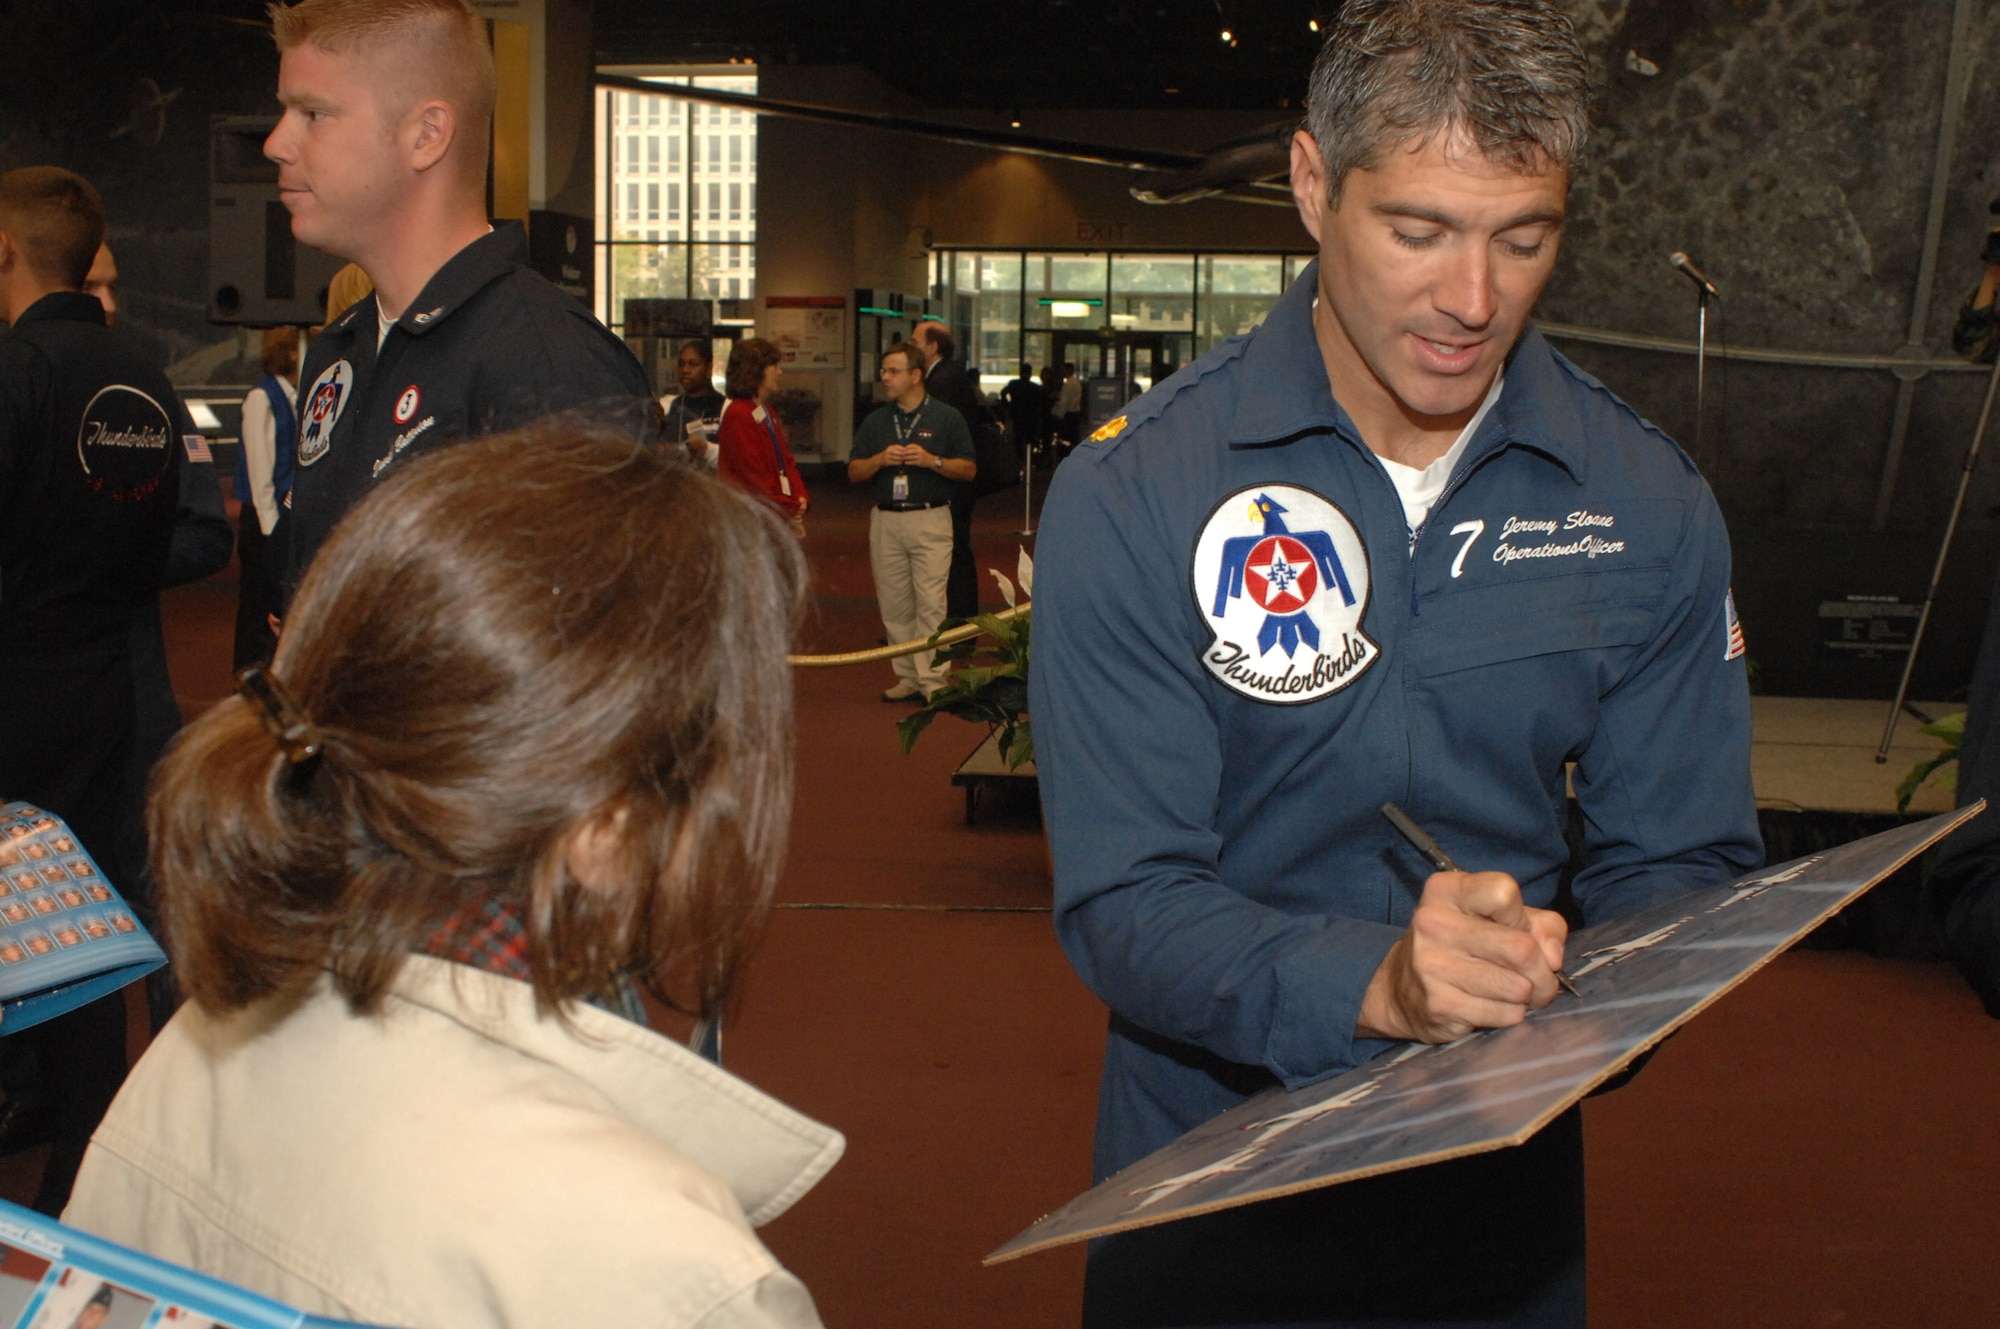 Maj. Jeremy Sloane signs a poster for a fan at the Smithsonian Air and Space Museum Oct. 11 in Washington, D.C. Major Sloane is the Thunderbirds operations officer and was at the Smithsonian as part of a week-long series of events that will culminate with the opening of the Air Force Memorial Oct. 14. (U.S. Air Force photo/Master Sgt. Gary R. Coppage) 
